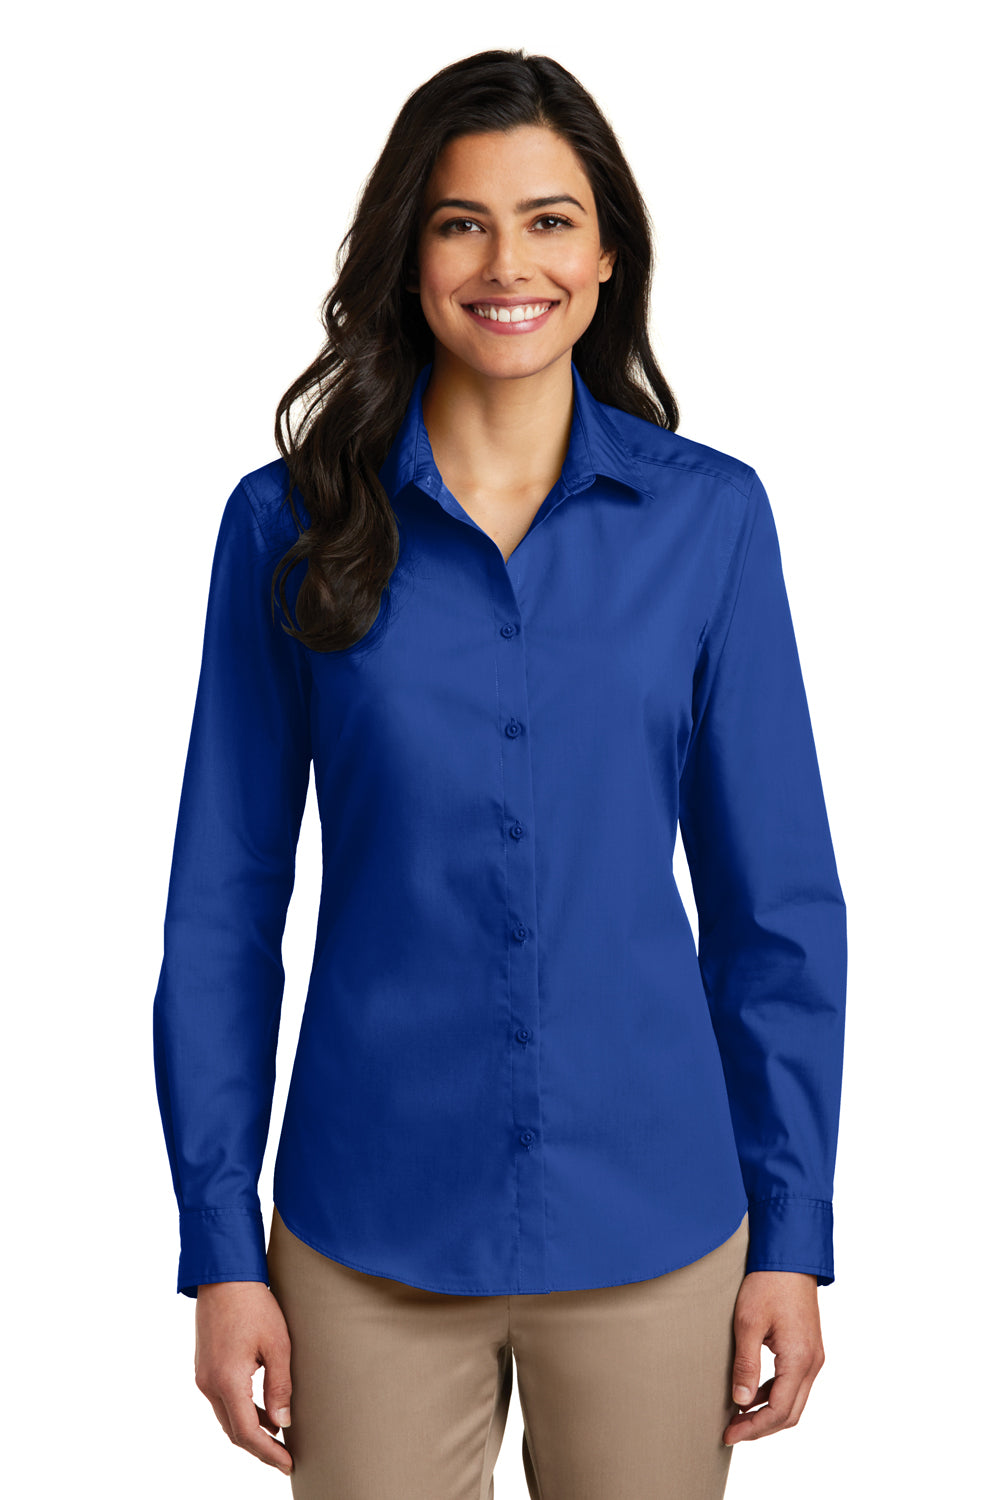 Port Authority Womens Carefree Stain Resistant Long Sleeve Button Down  Shirt - True Royal Blue